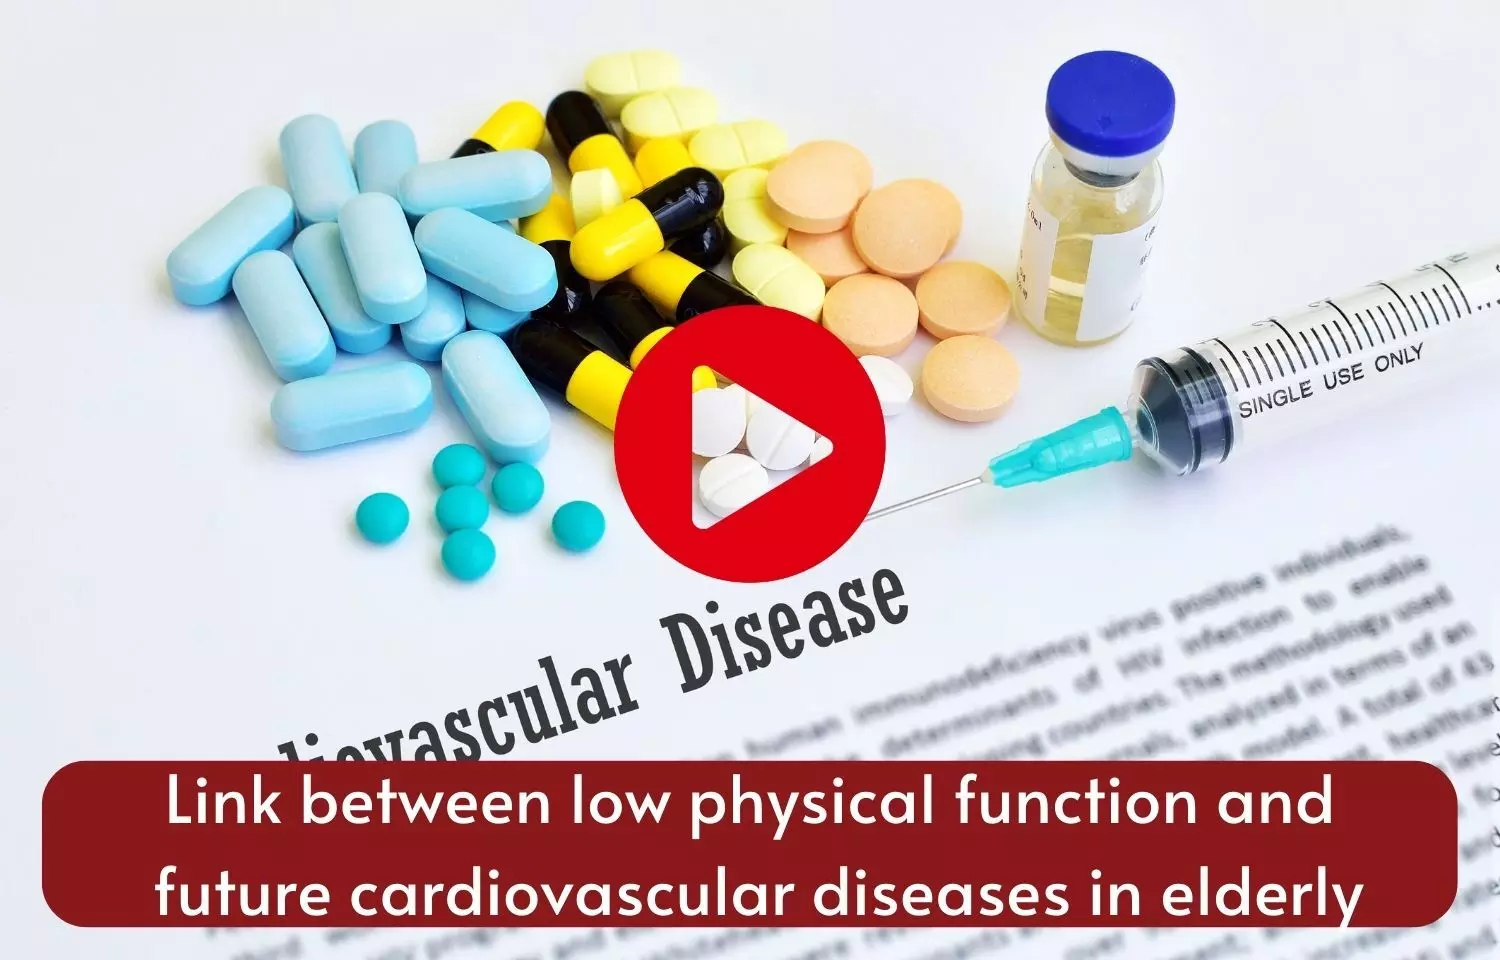 Link between low physical function and future cardiovascular diseases in elderly